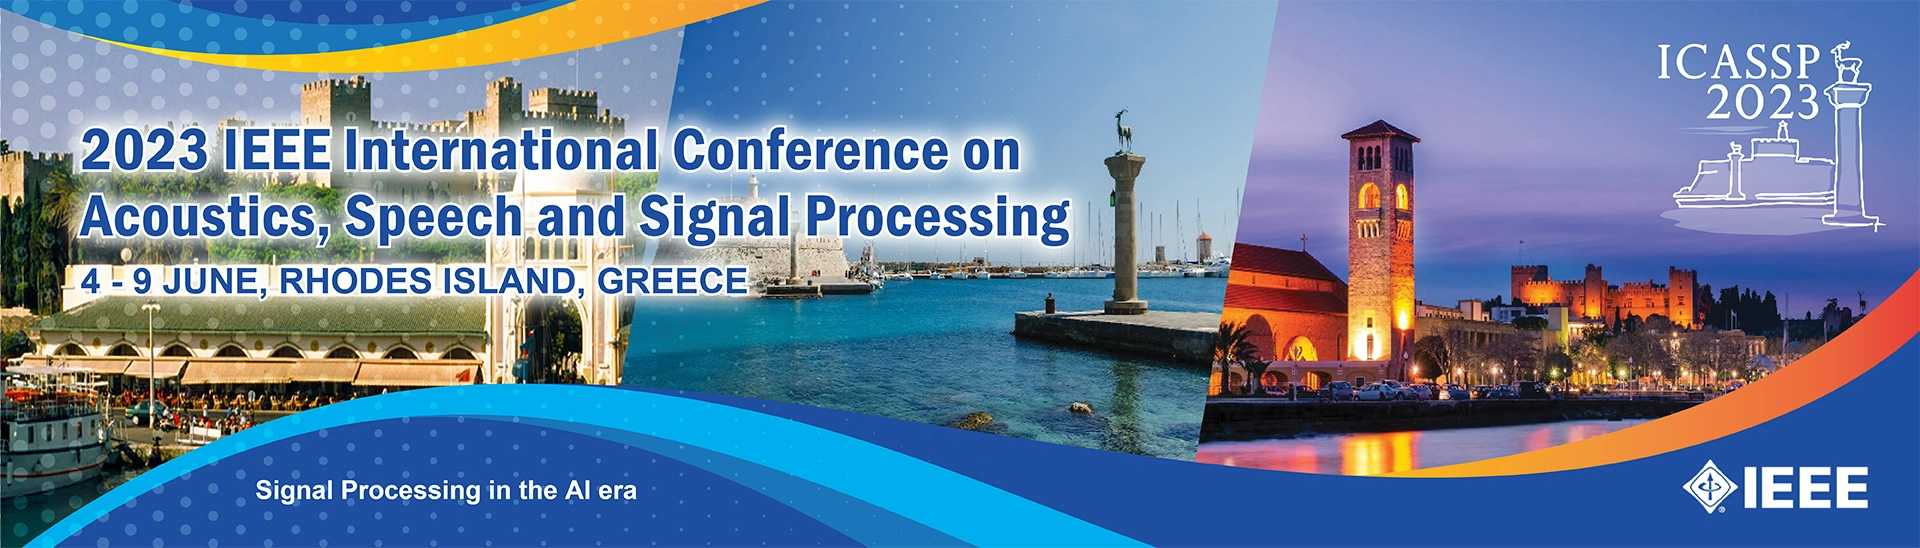 2023 IEEE International Conference on Acoustics, Speech and Signal Processing – From 4 to 9 June, Rhodes Island, Greece – Signal Processing in the AI era